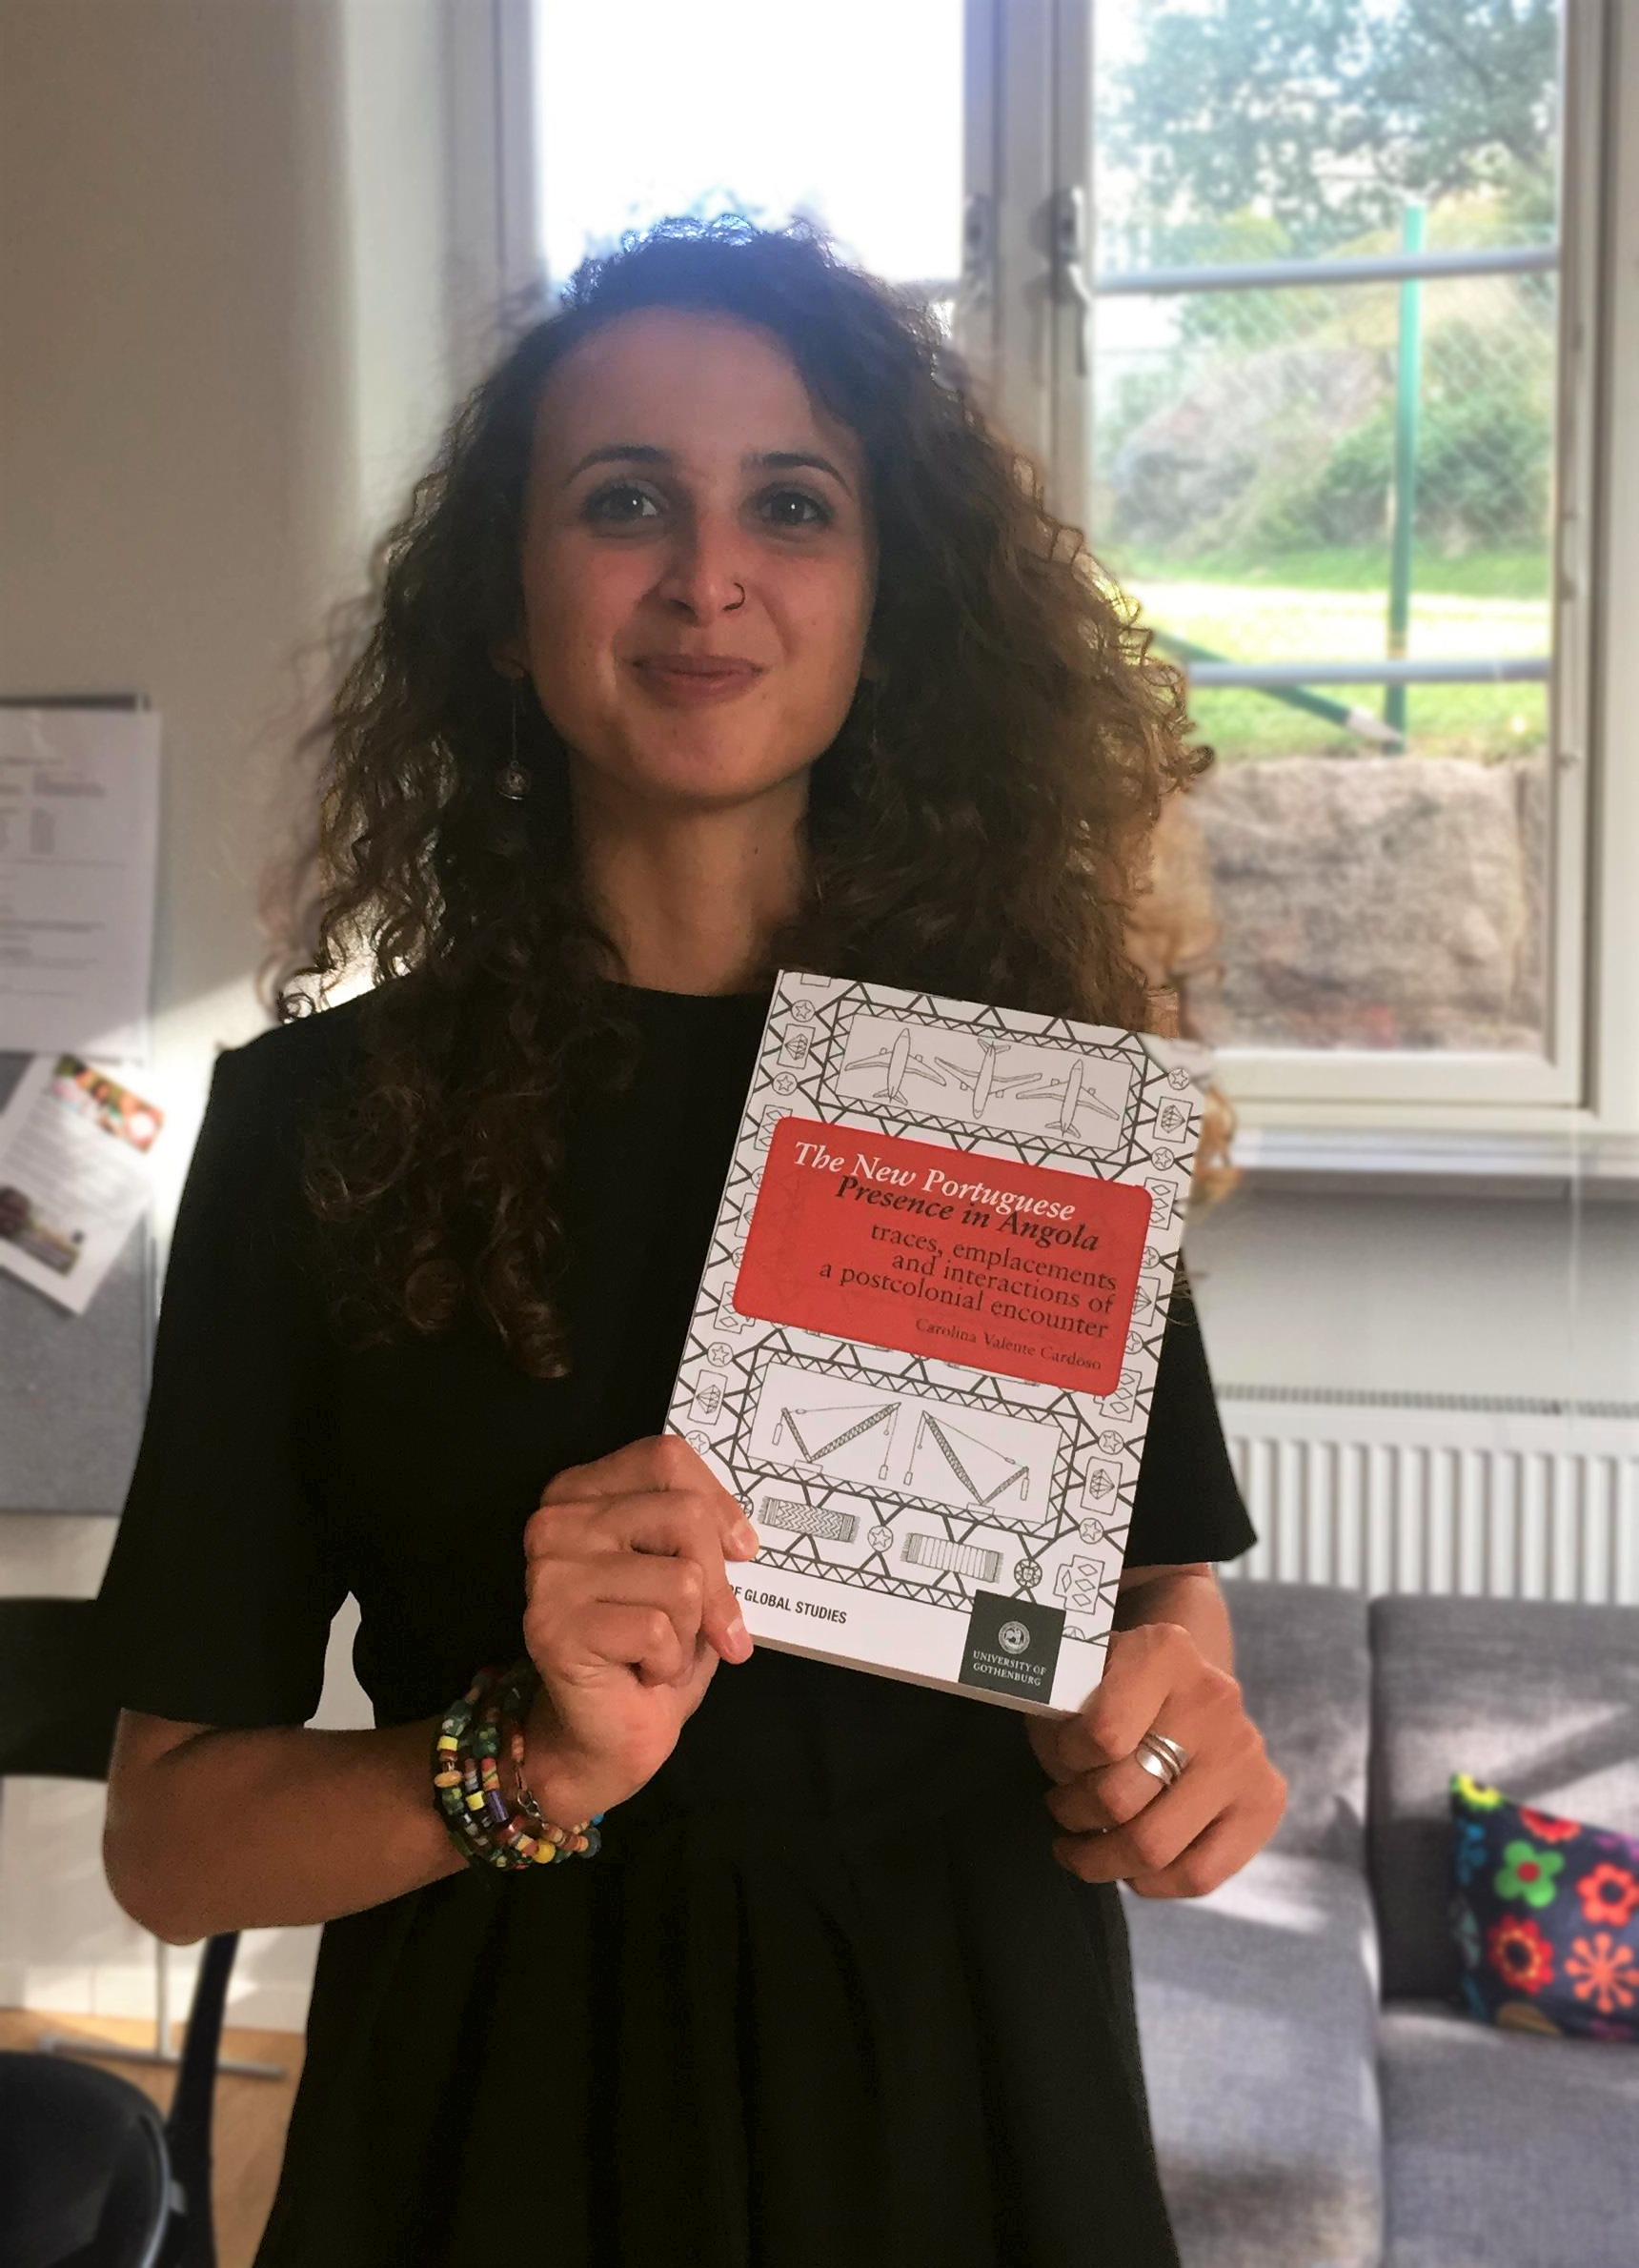 Carolina Valente Cardoso with her PhD thesis The New Portuguese Presence in Angola - Traces, Emplacements and Interactions of a Postcolonial Encounter